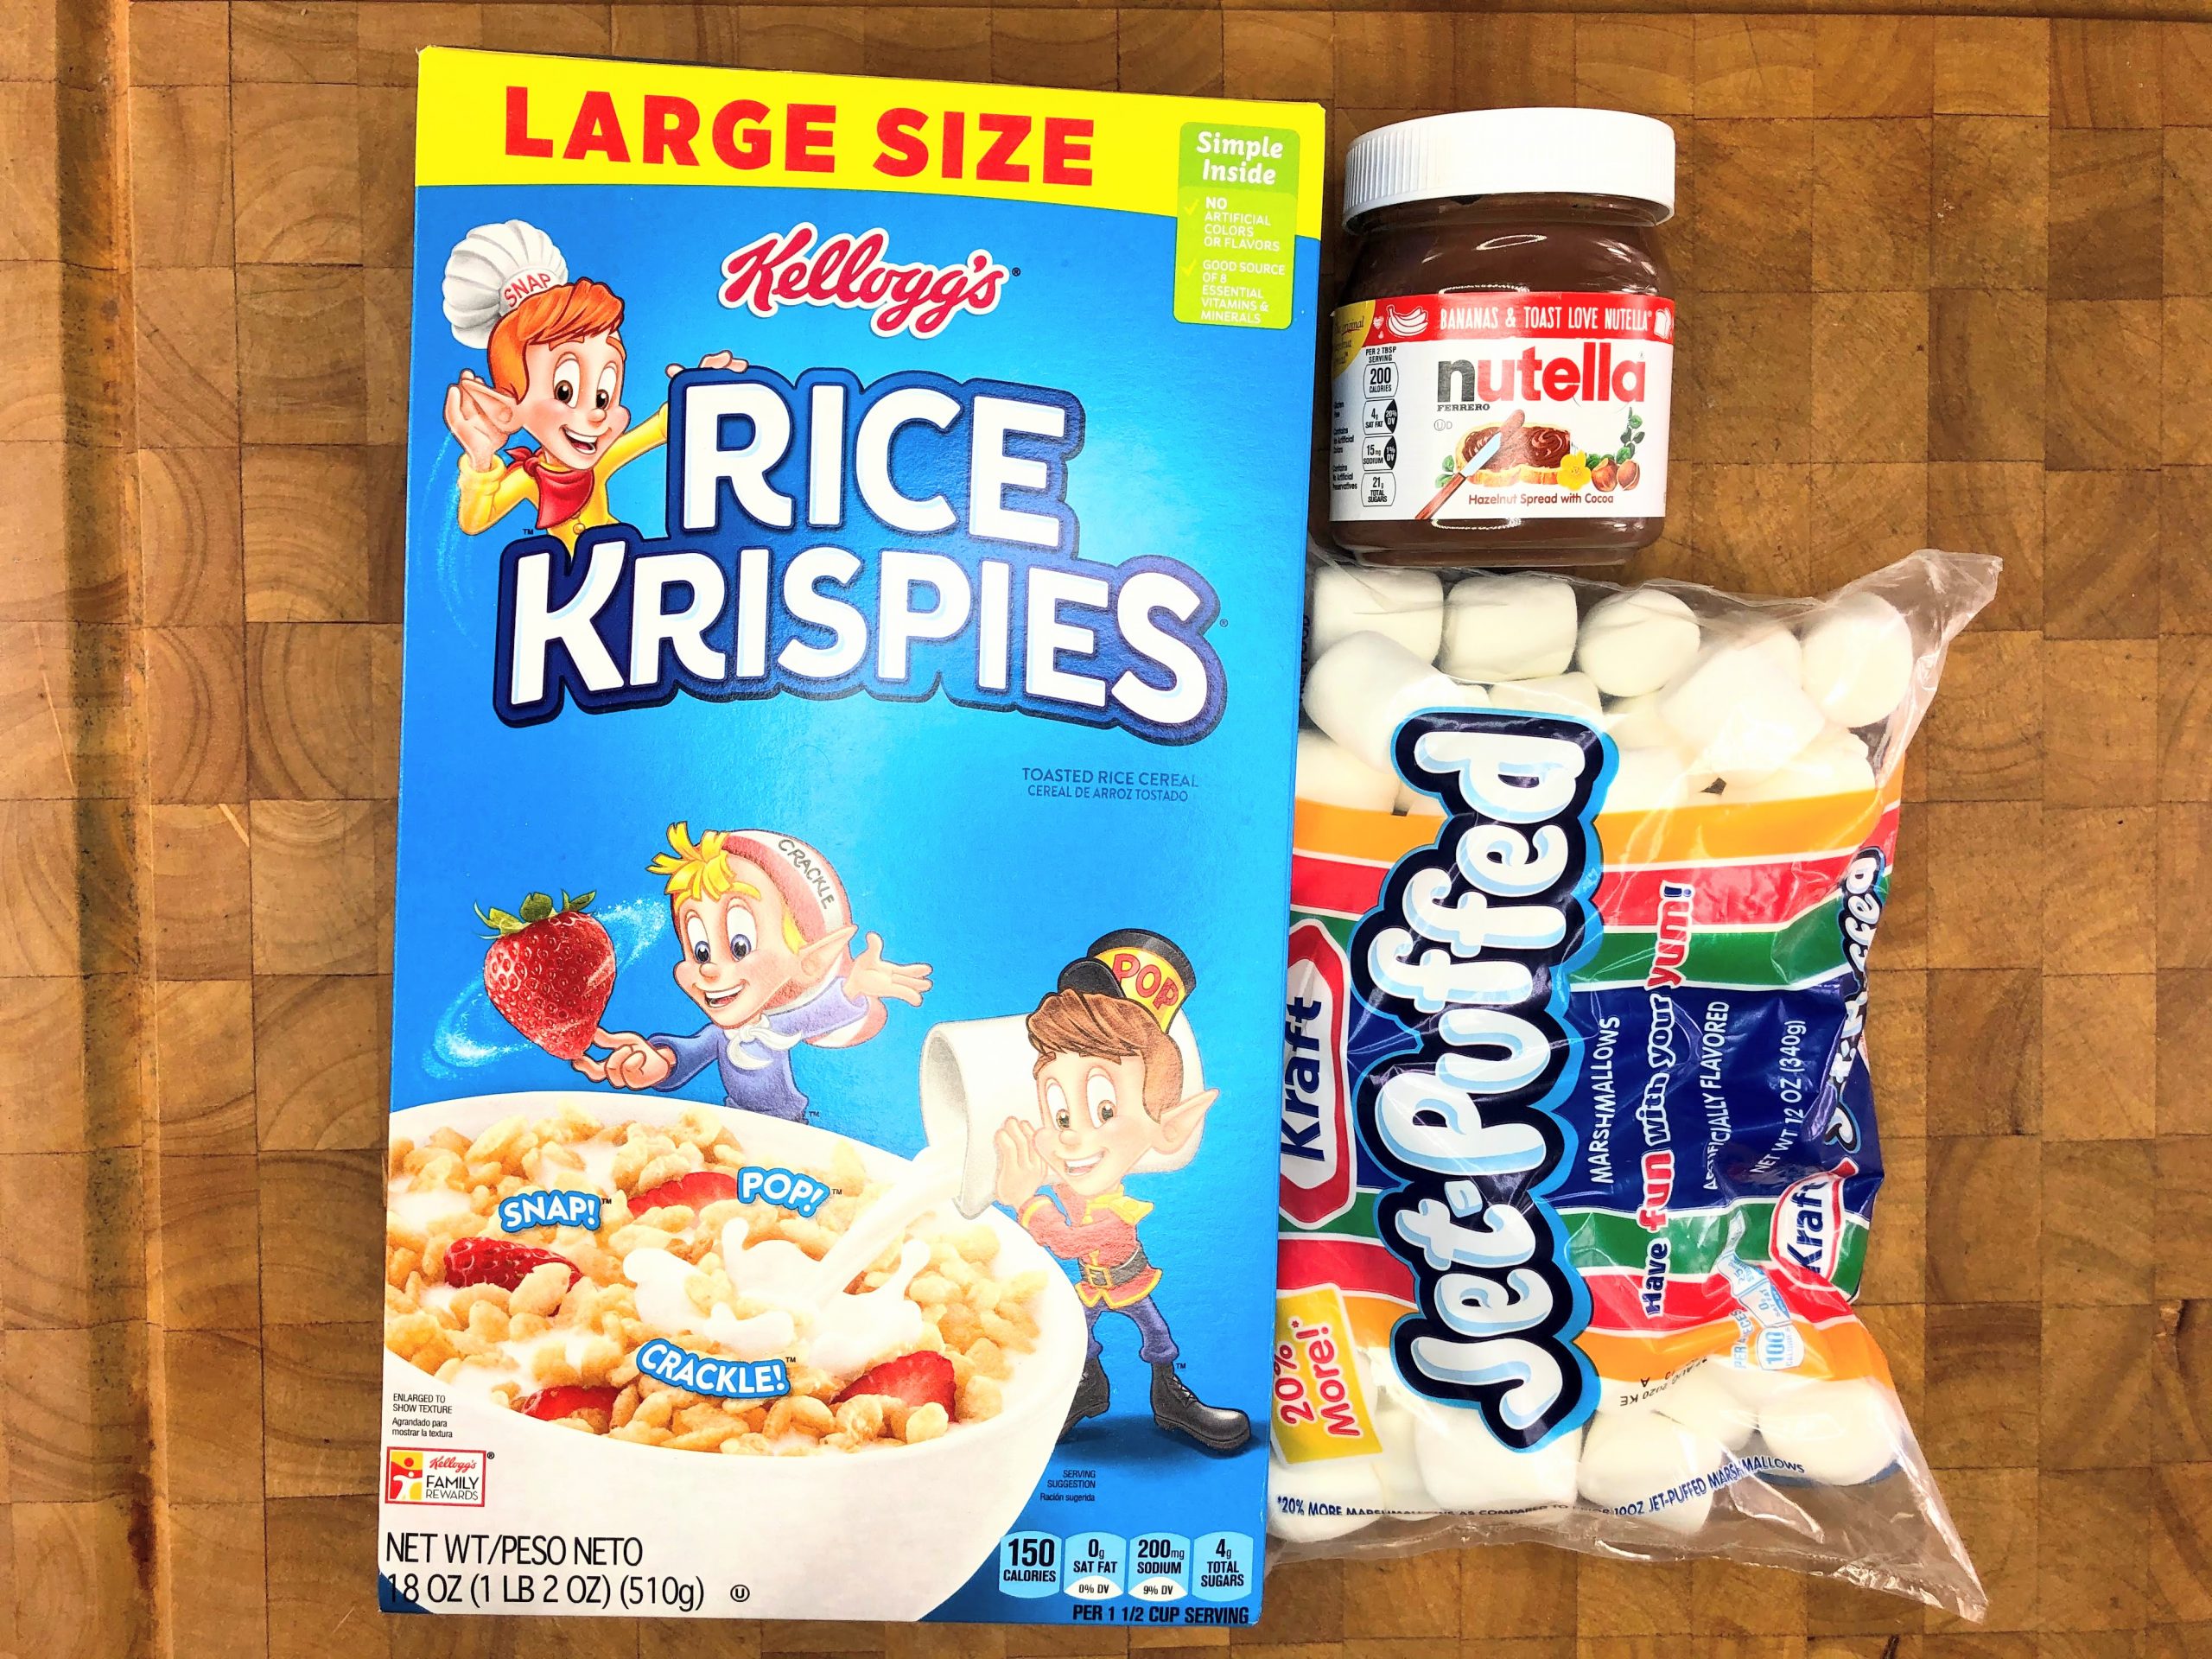 box of rice krispies, jar of nutella and bag of marshmallows on a wooden table